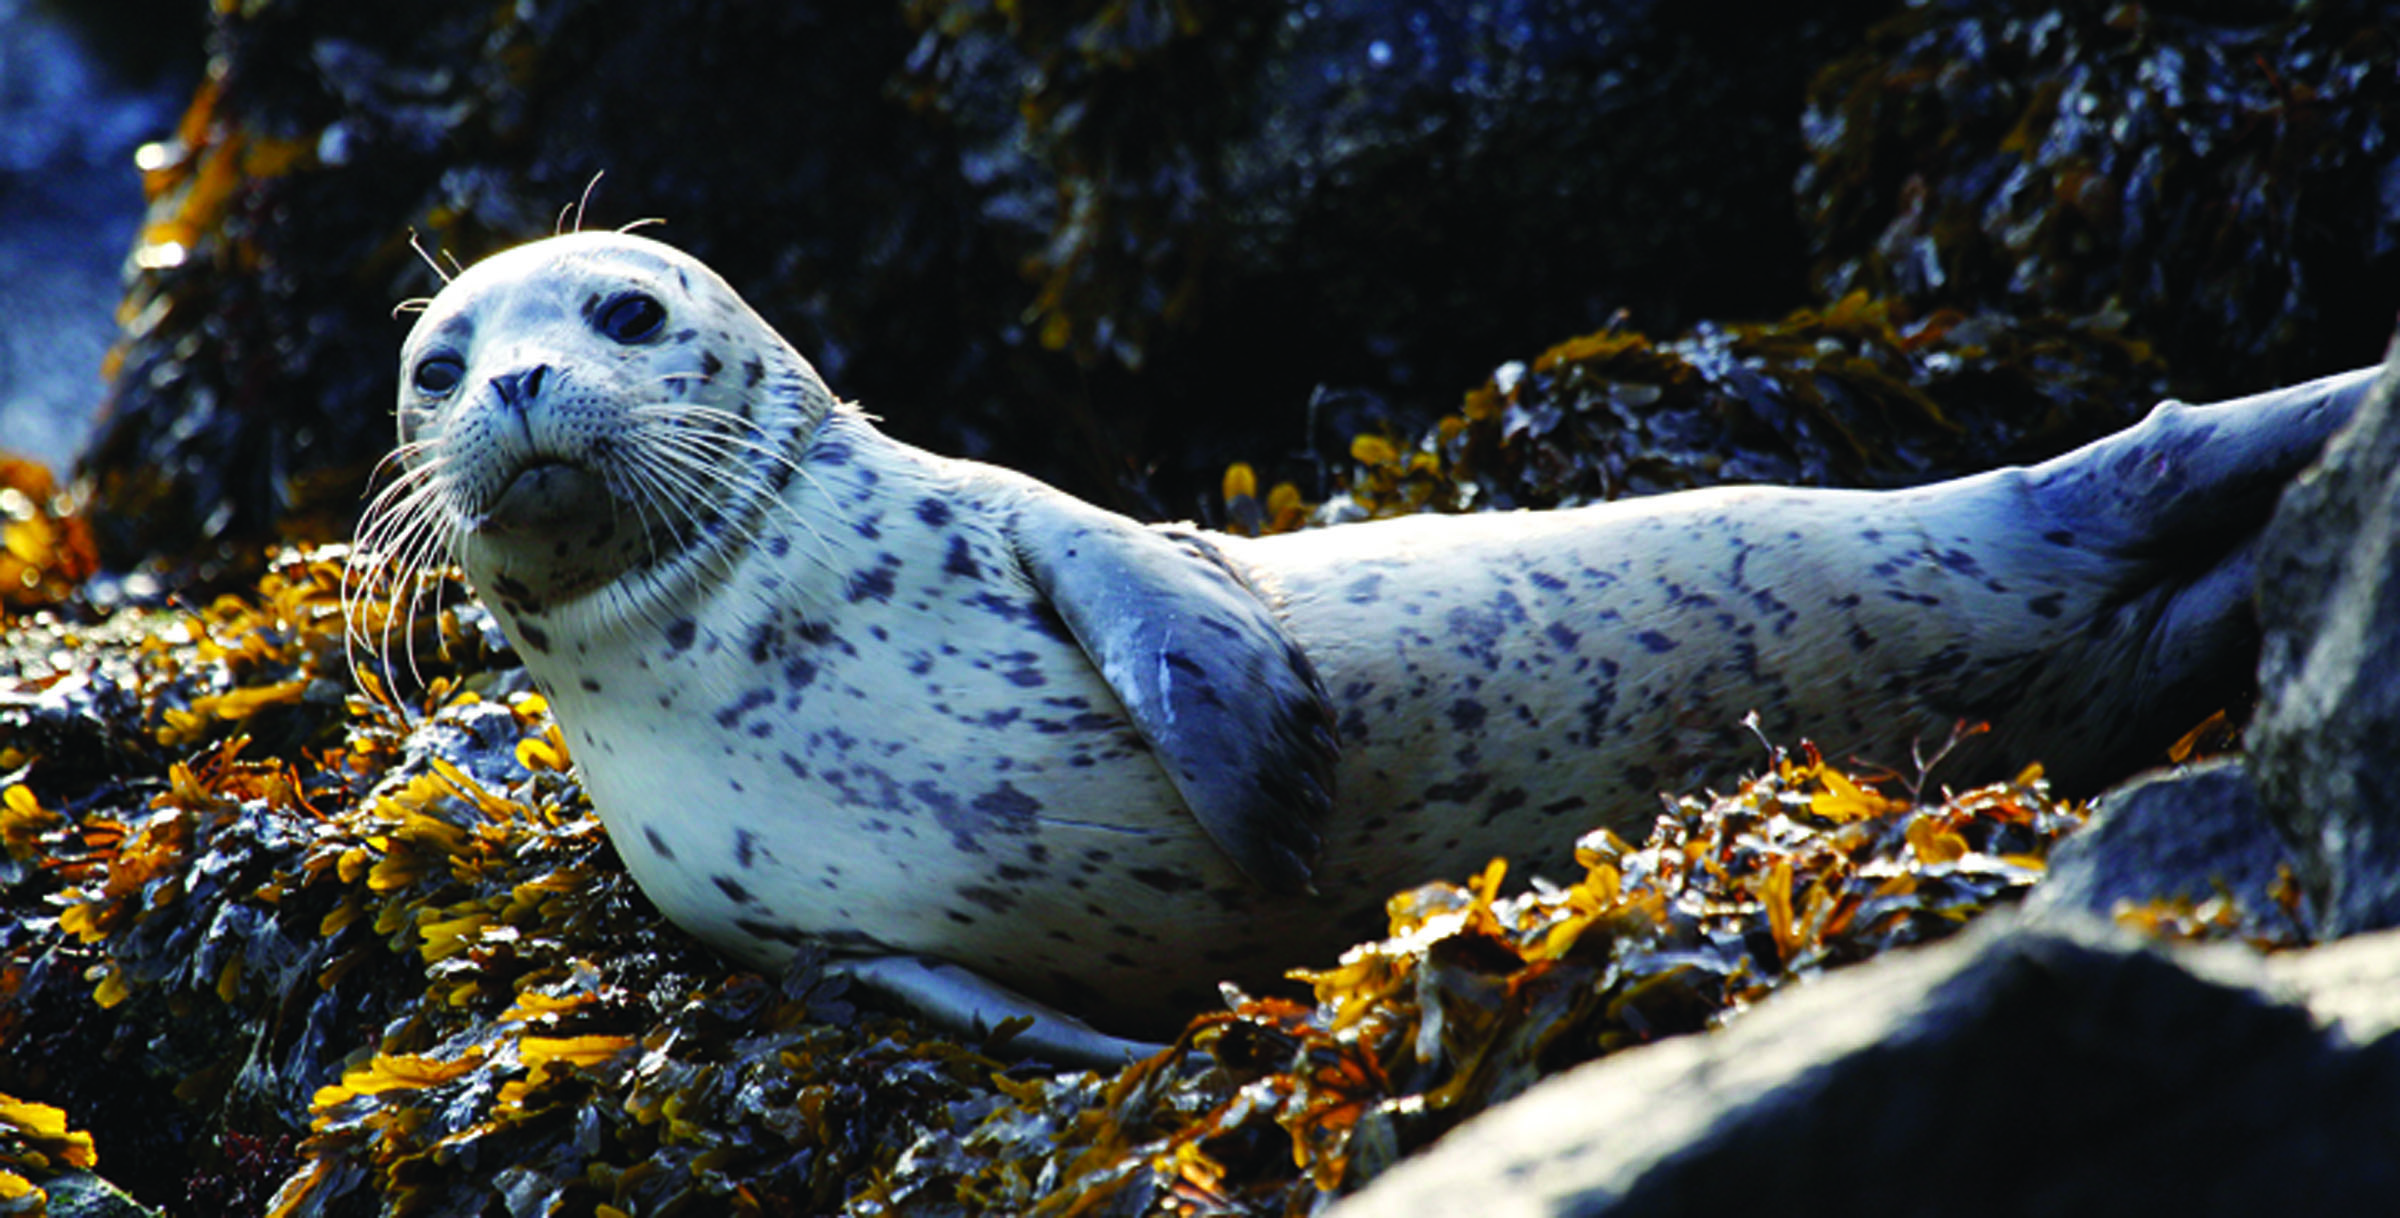 A harbor seal pup rests on seaweed-covered rocks after coming in on the high tide in the West Seattle neighborhood of Seattle. (The Associated Press)